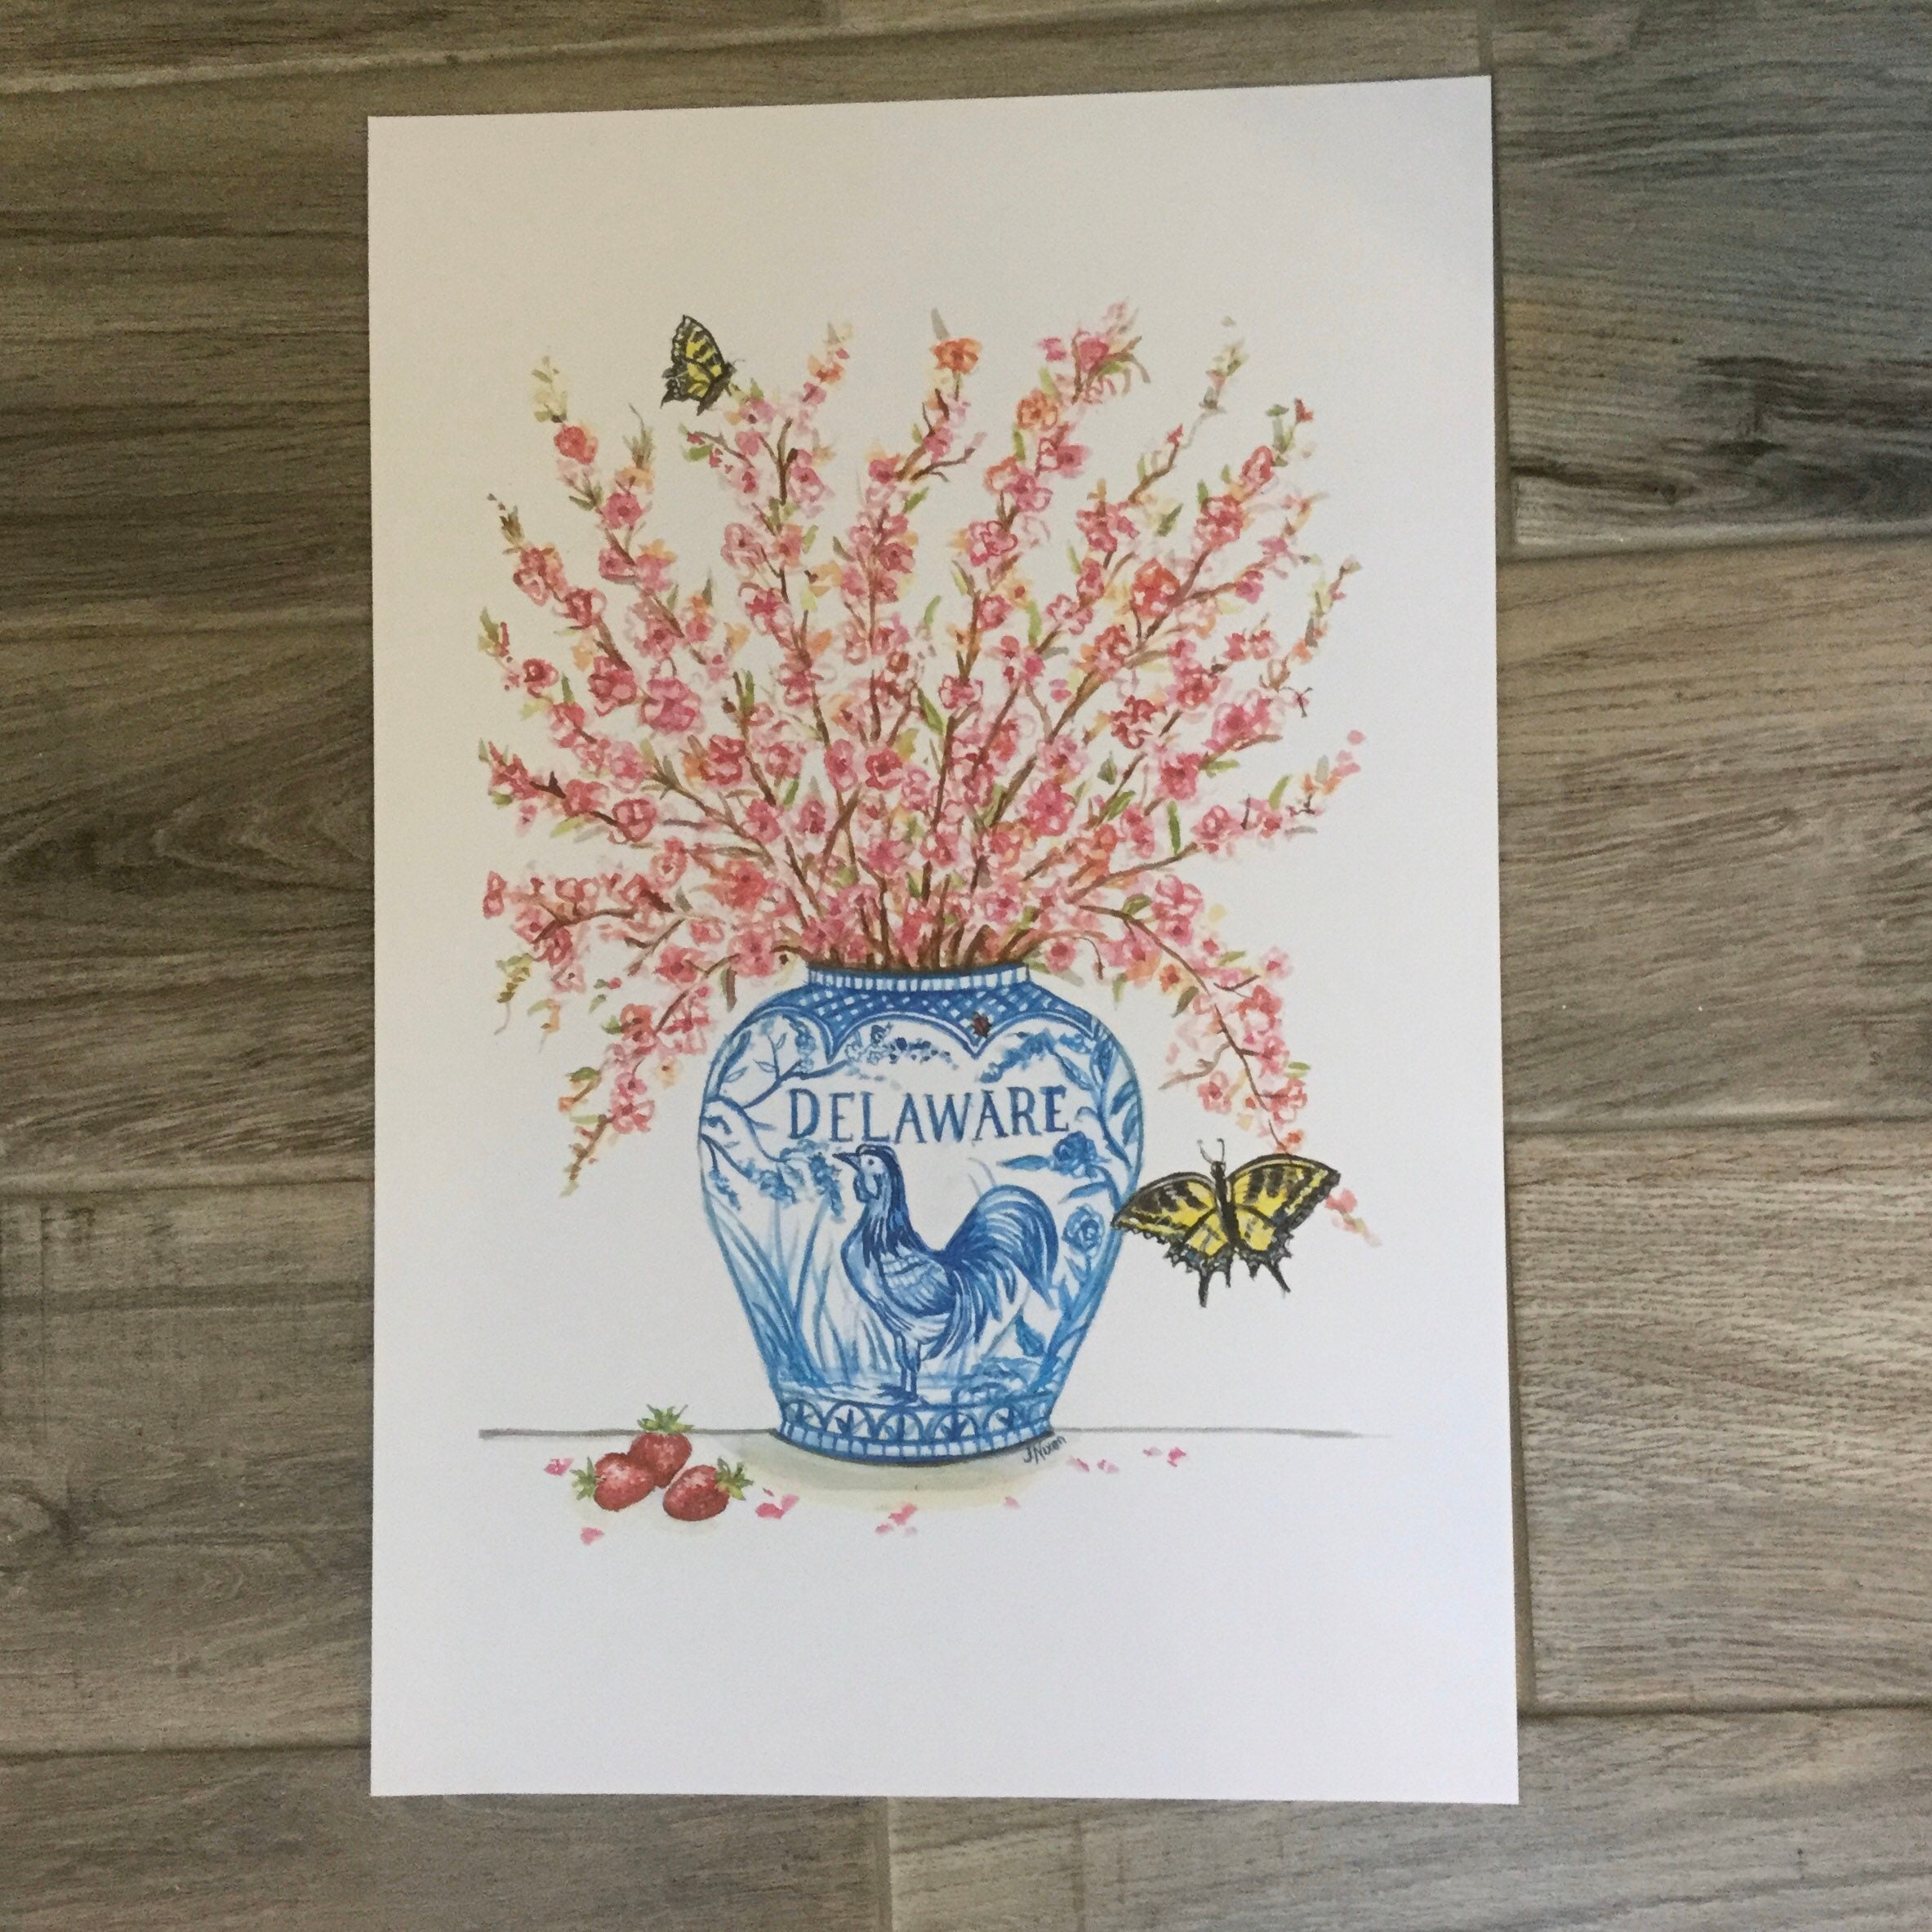 Delaware Peach Blossoms and Blue Hen Prints - Etsy